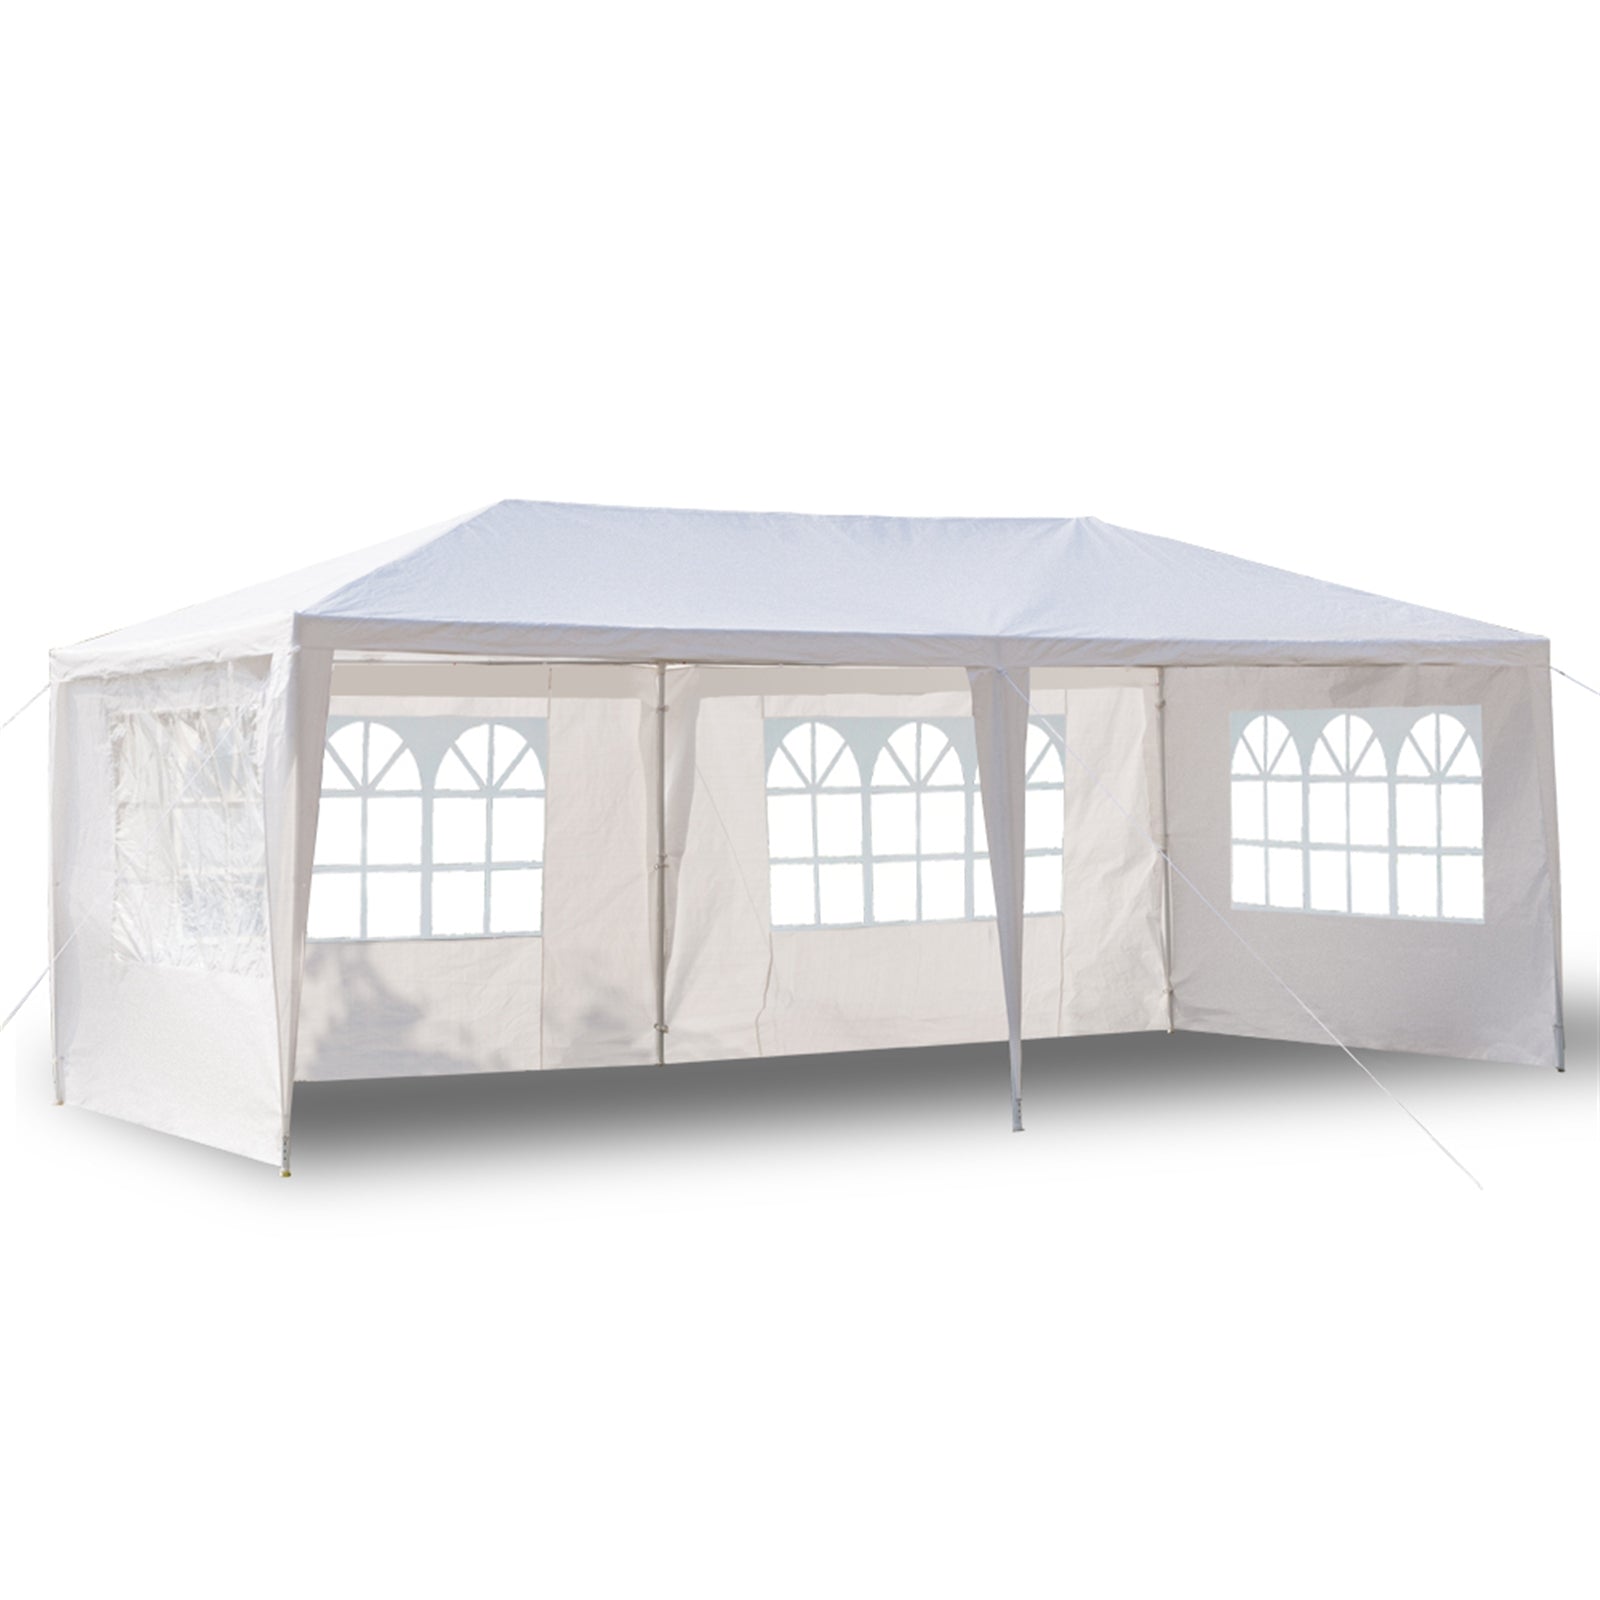 White 3 x 6m Four Sided Party Tent